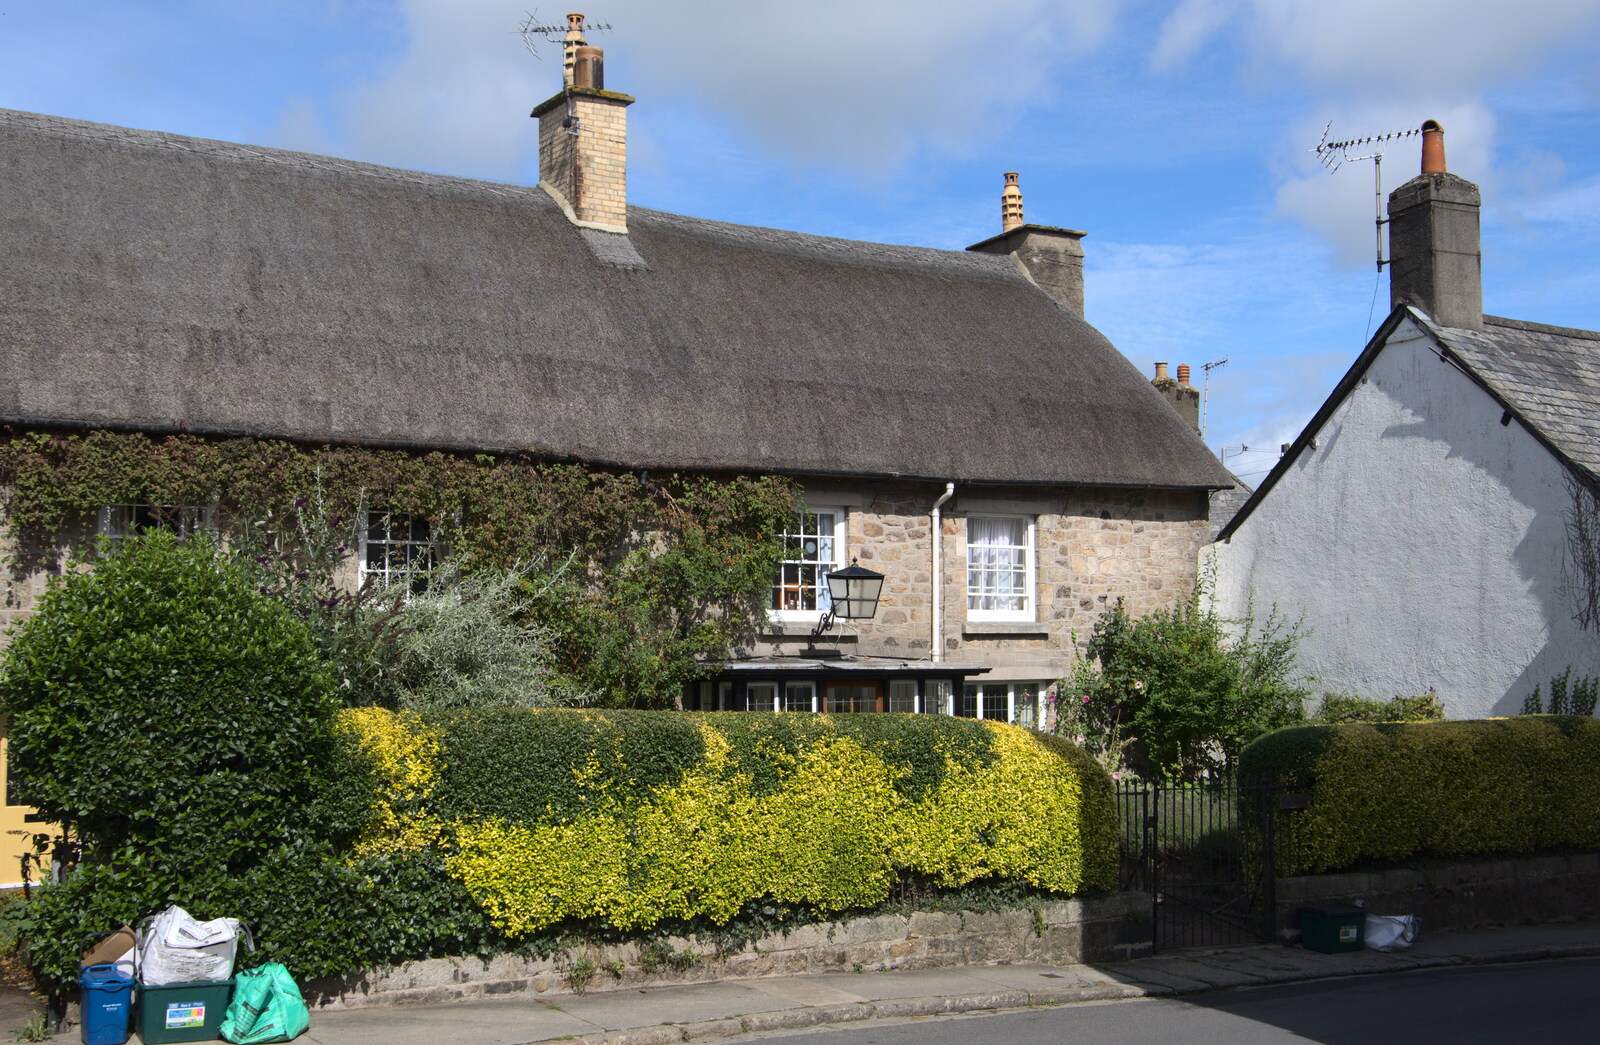 A Chagford thatched house from A Game of Cricket, and a Walk Around Chagford, Devon - 23rd August 2020